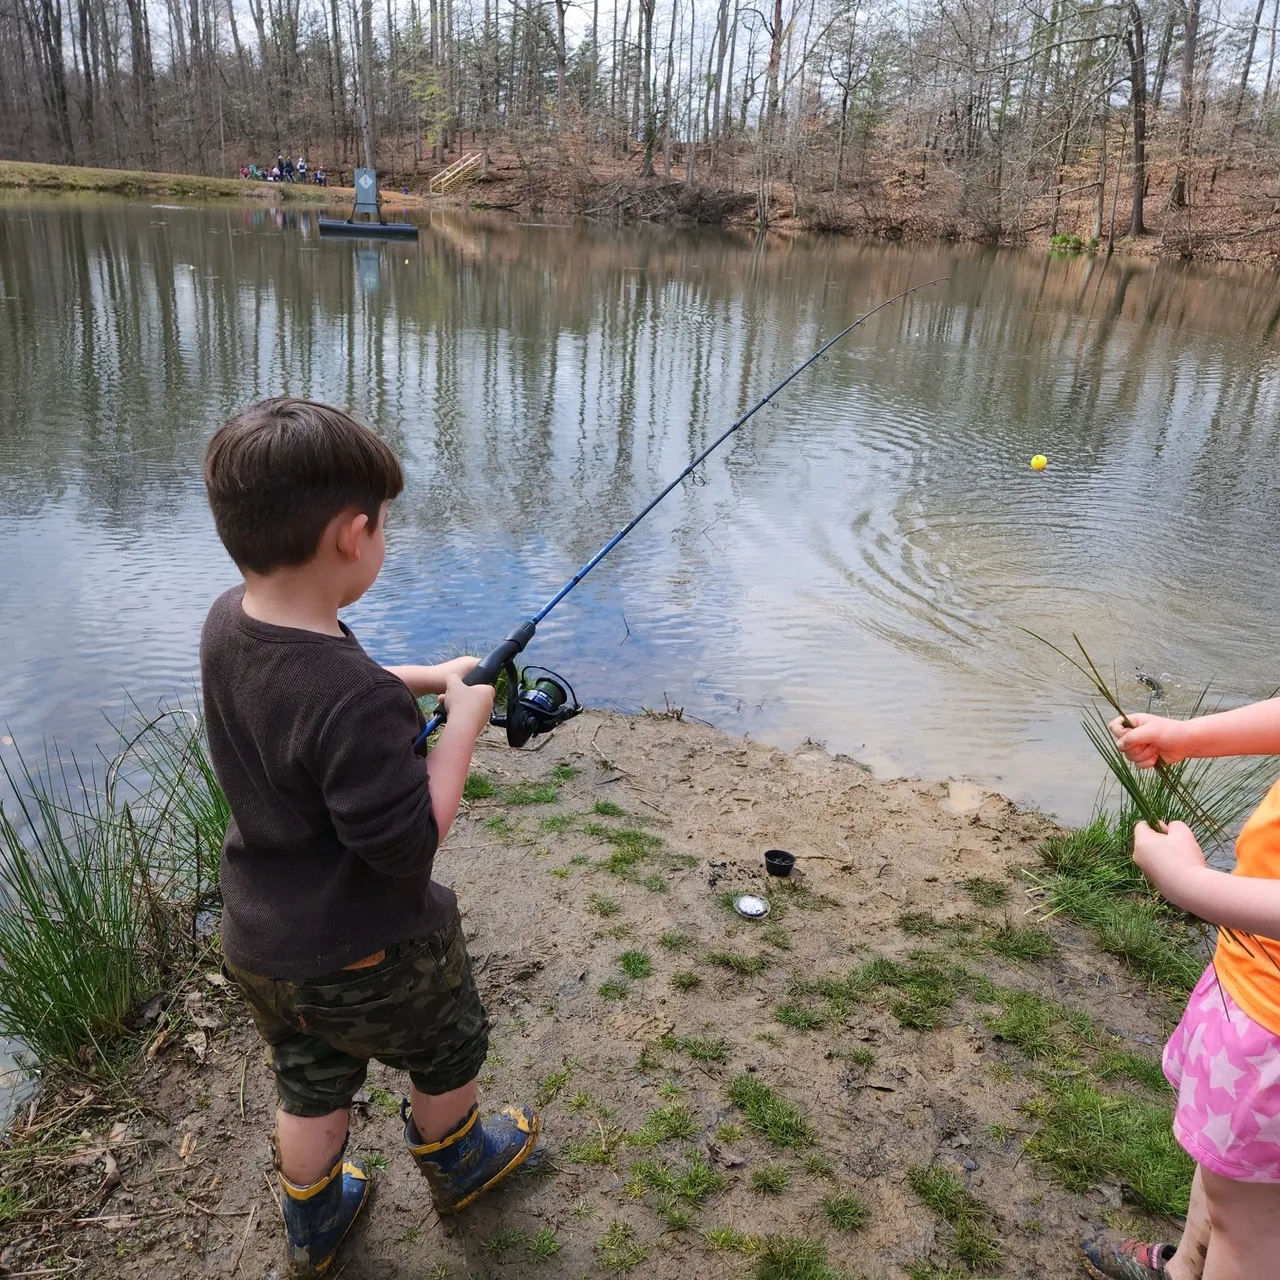 Two children fishing in a pond on the shore.